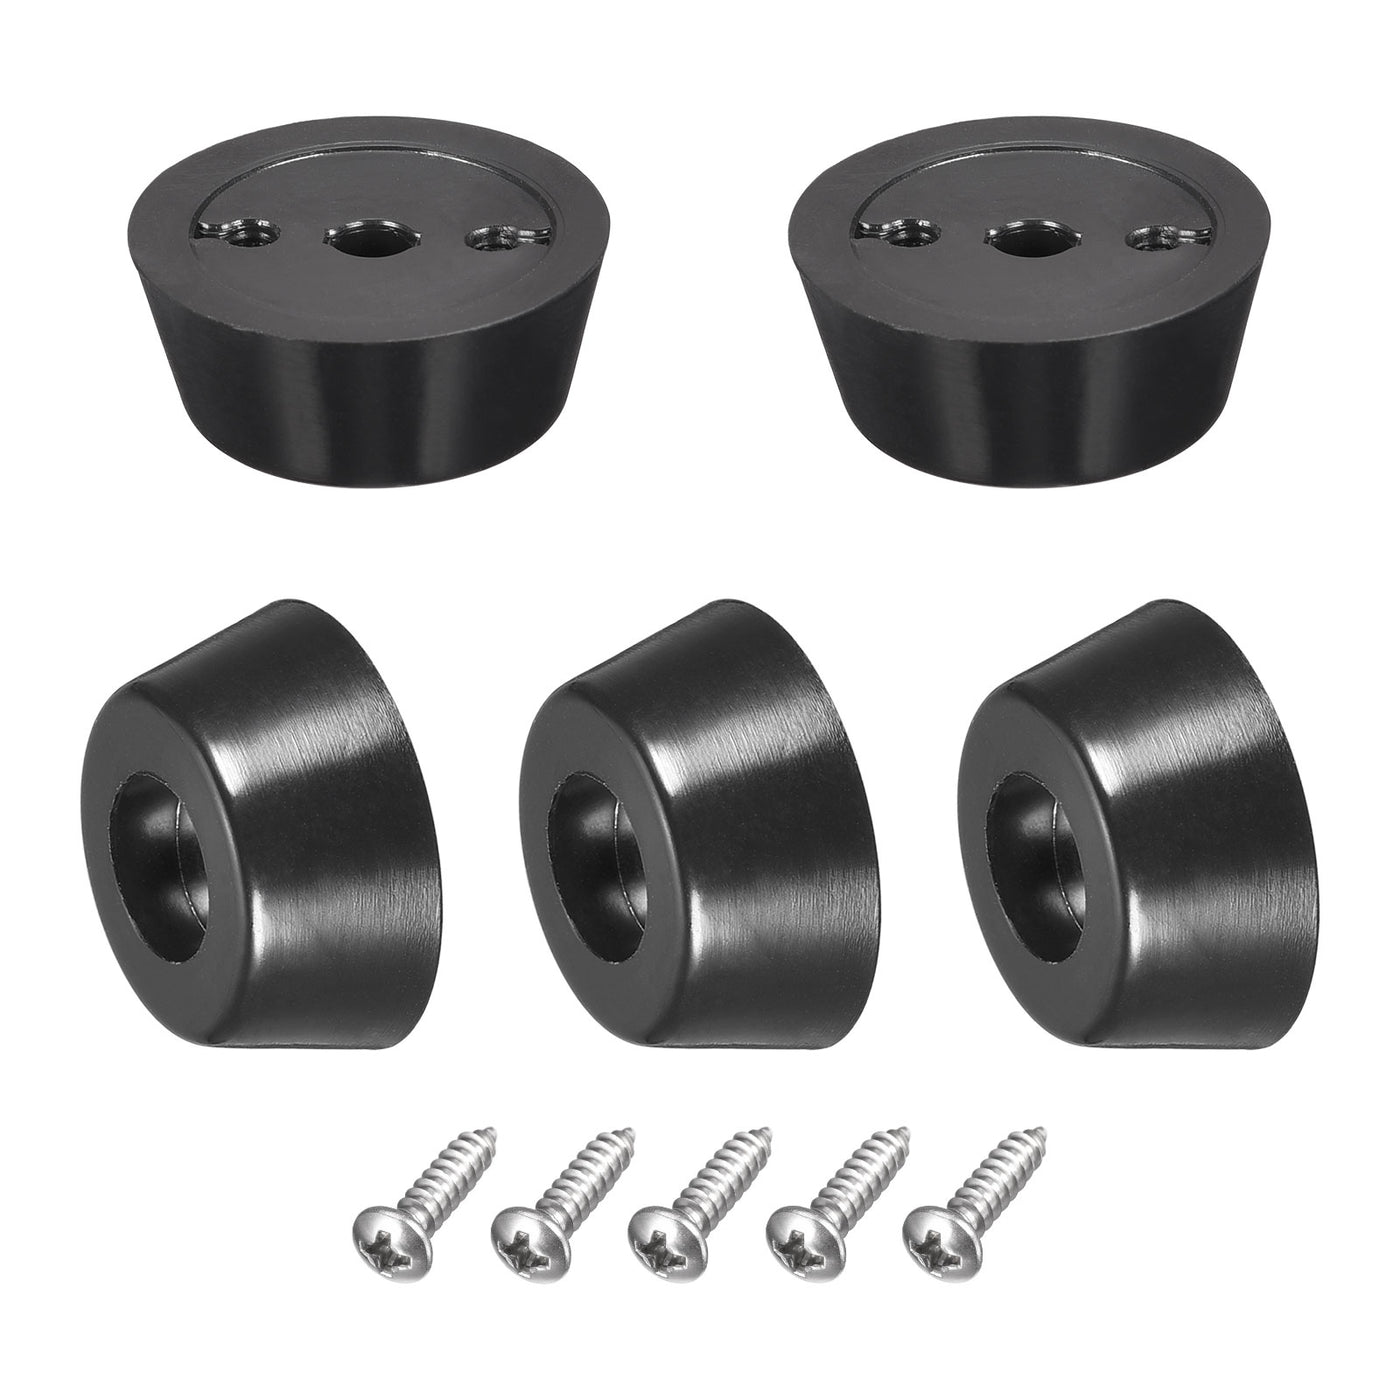 uxcell Uxcell 20mm W x 8mm H Rubber Bumper Feet, Stainless Steel Screws and Washer 20pcs